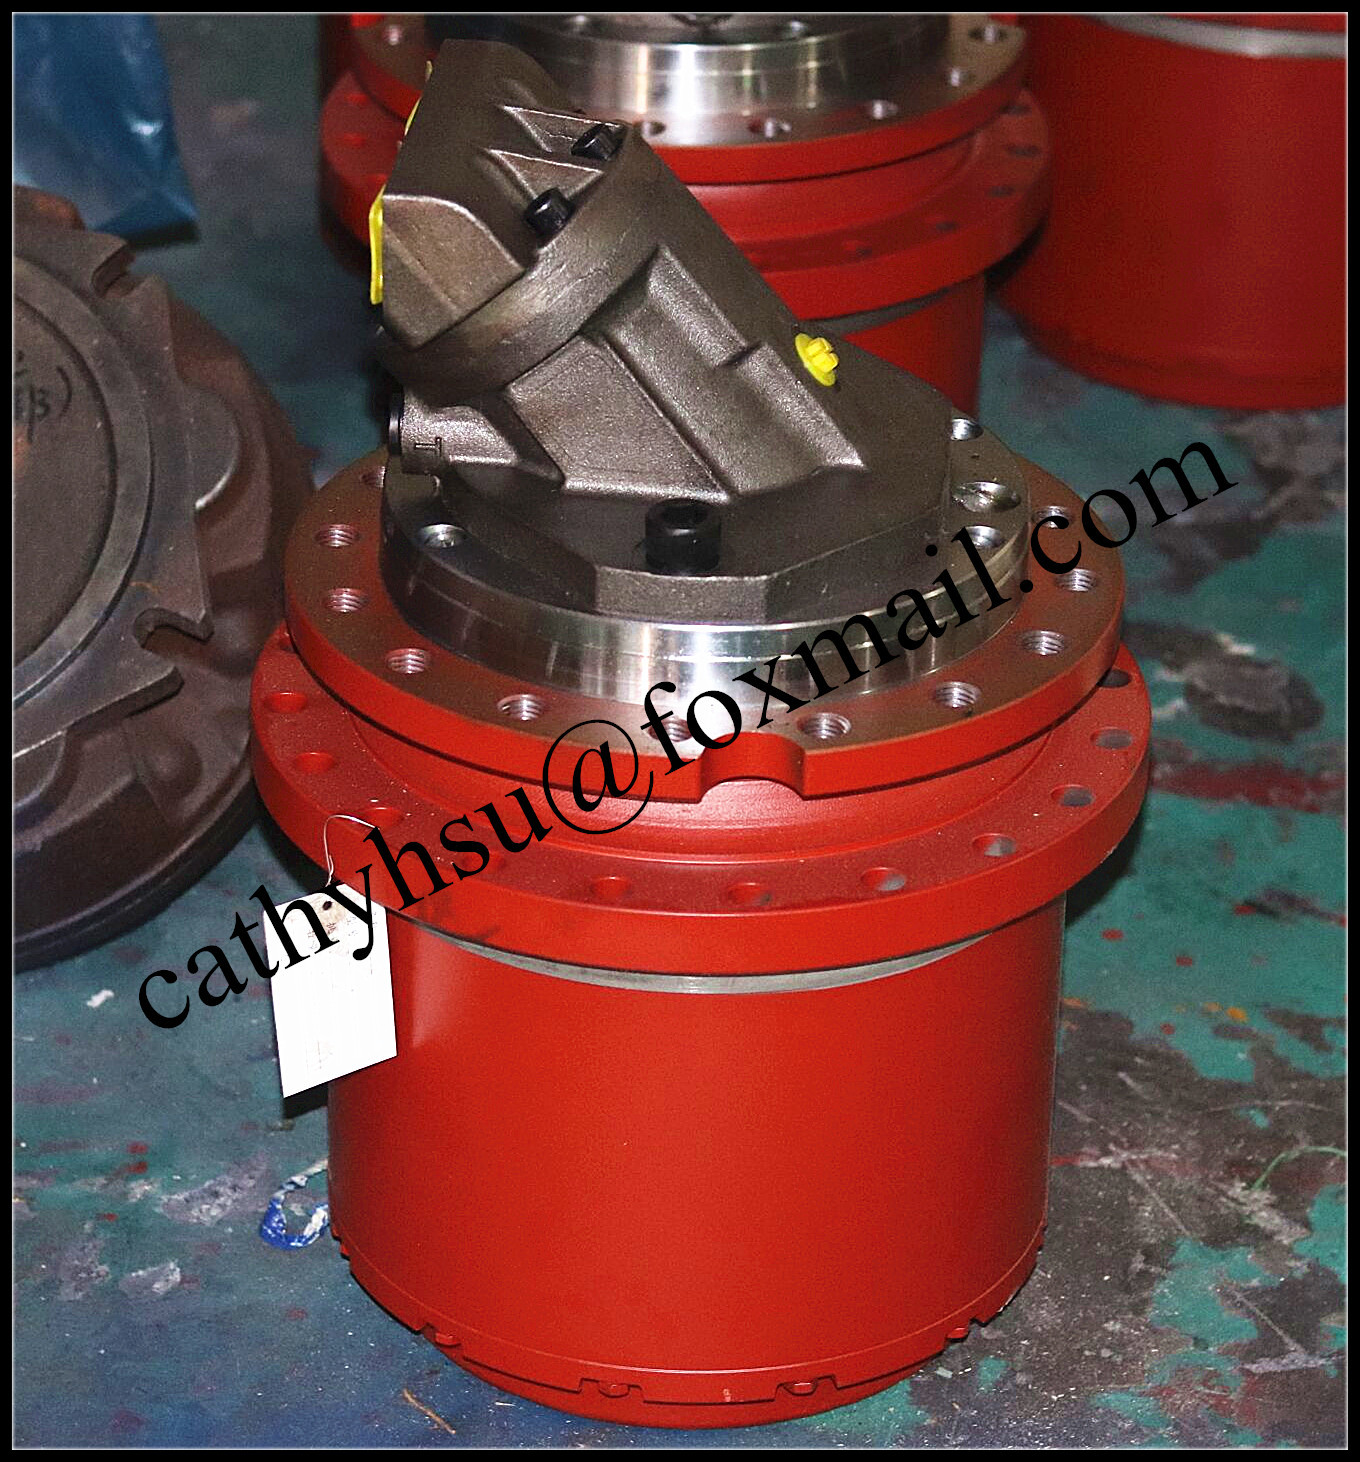 Interchanged with Rexroth GFT track drive gearbox Rexroth GFT series Travel Drive Track Motor Track Drive Final Drive gearbox Model: GFT13T2, GFT17T2, GFT17T3, GFT24T3, GFT26T2, GFT36T3, GFT50T3, GFT60T3, GFT80T3, GFT110T3, GFT160T3, GFT220T3